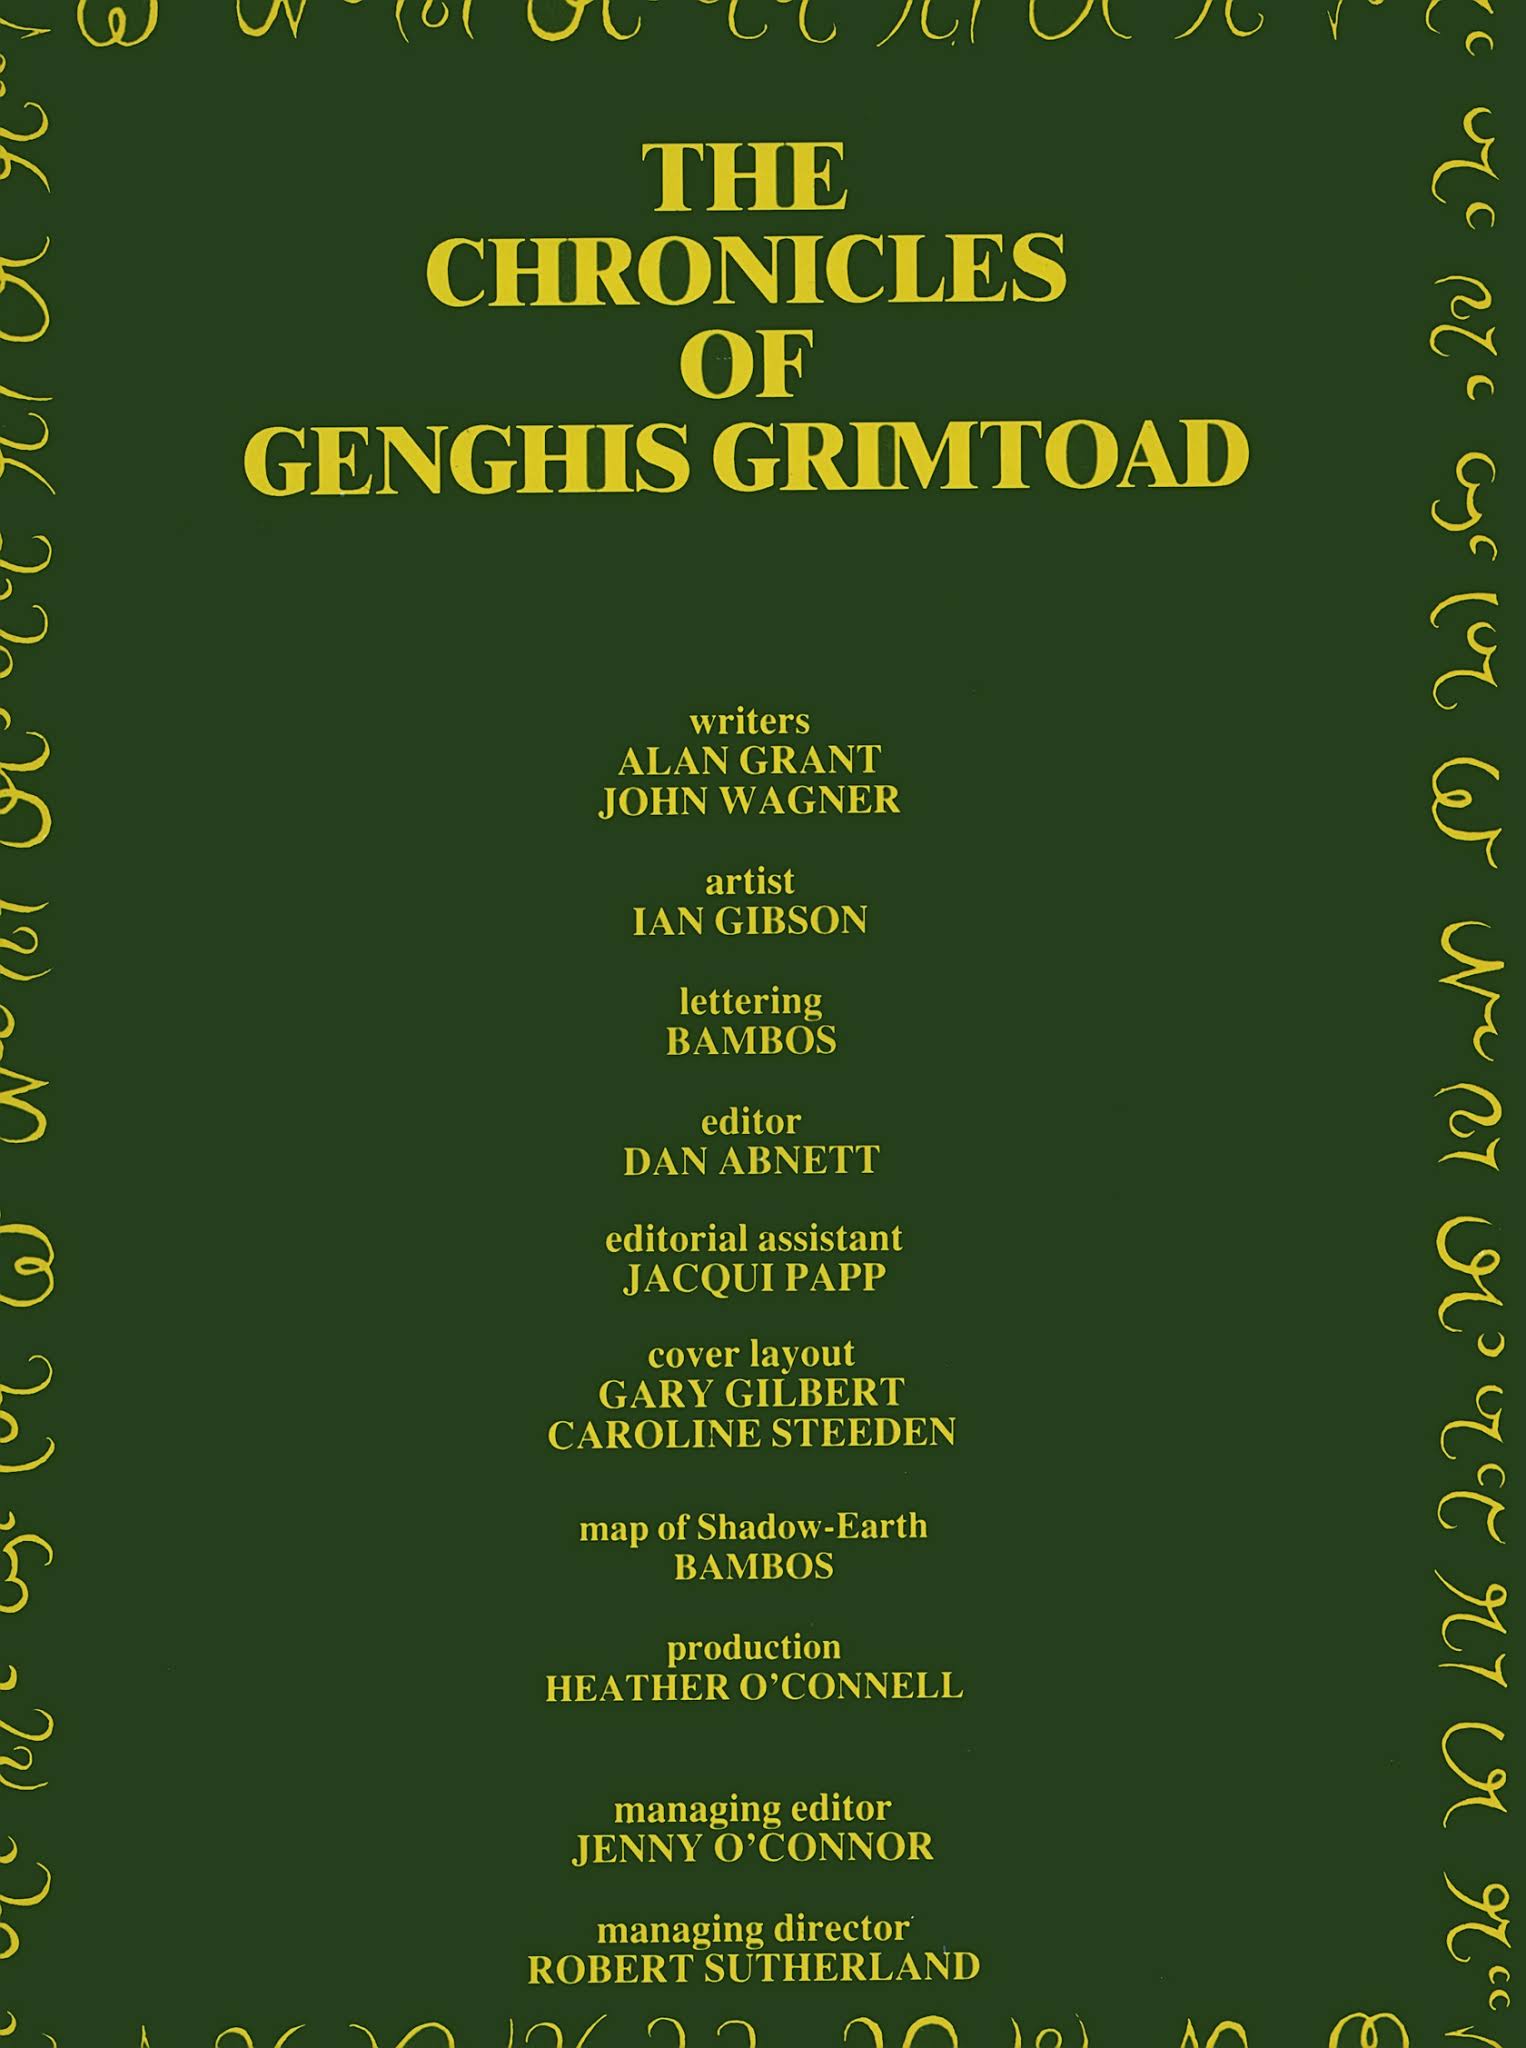 Read online The Chronicles of Genghis Grimtoad comic -  Issue # Full - 2